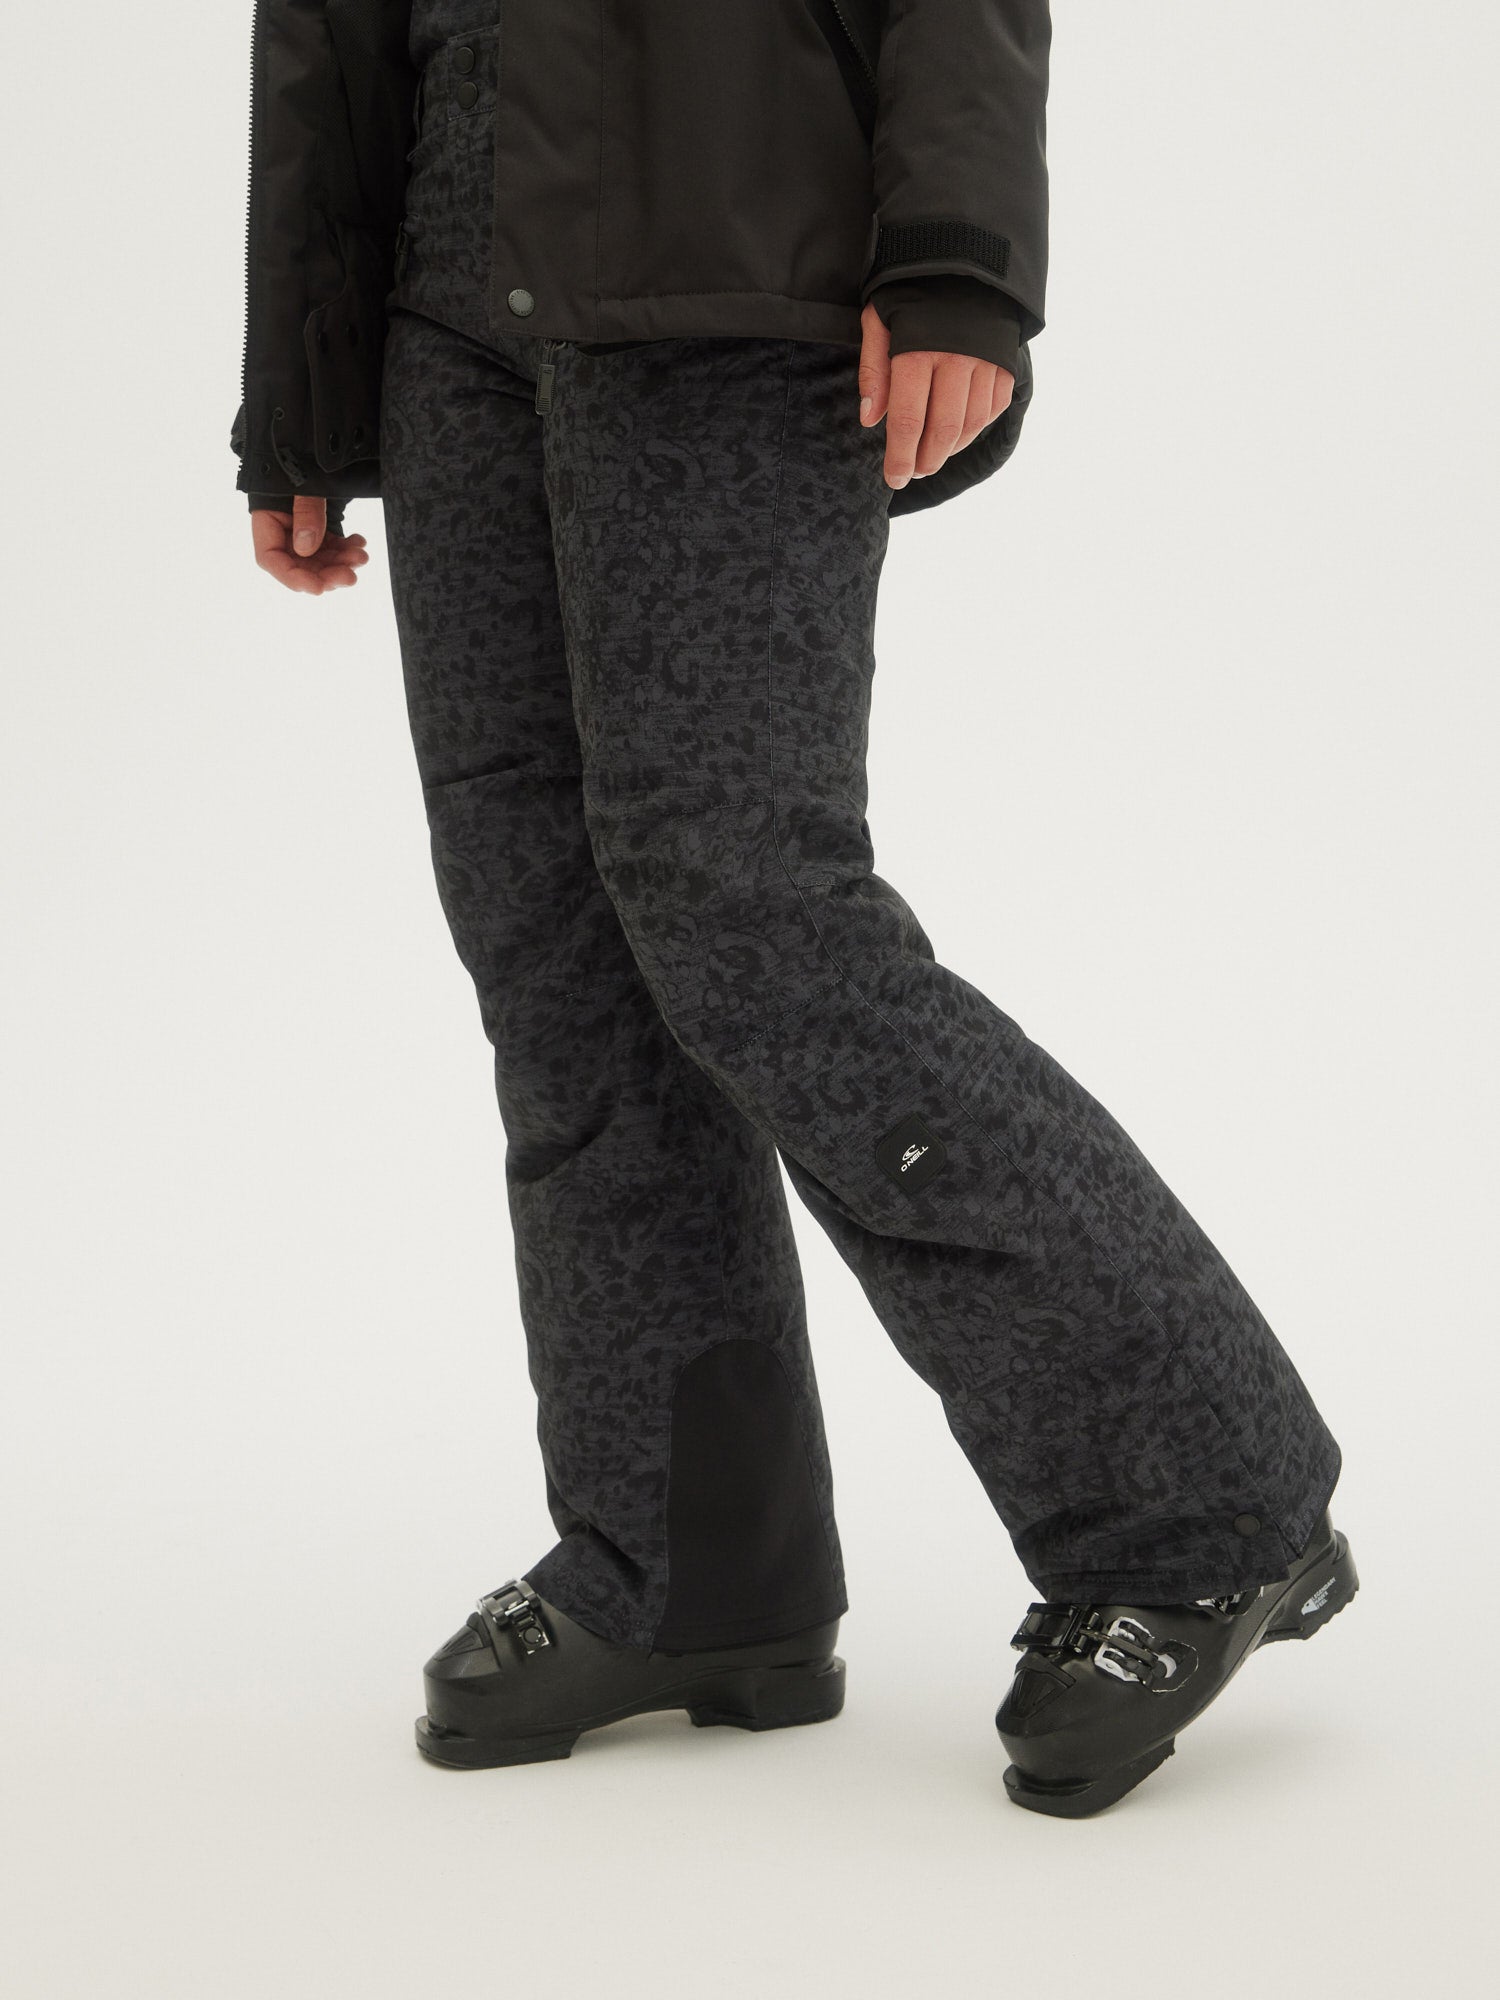 Generation Of Winter Plus Velvet Thick Warm Pants at Rs 2699.00, Winter  Pant